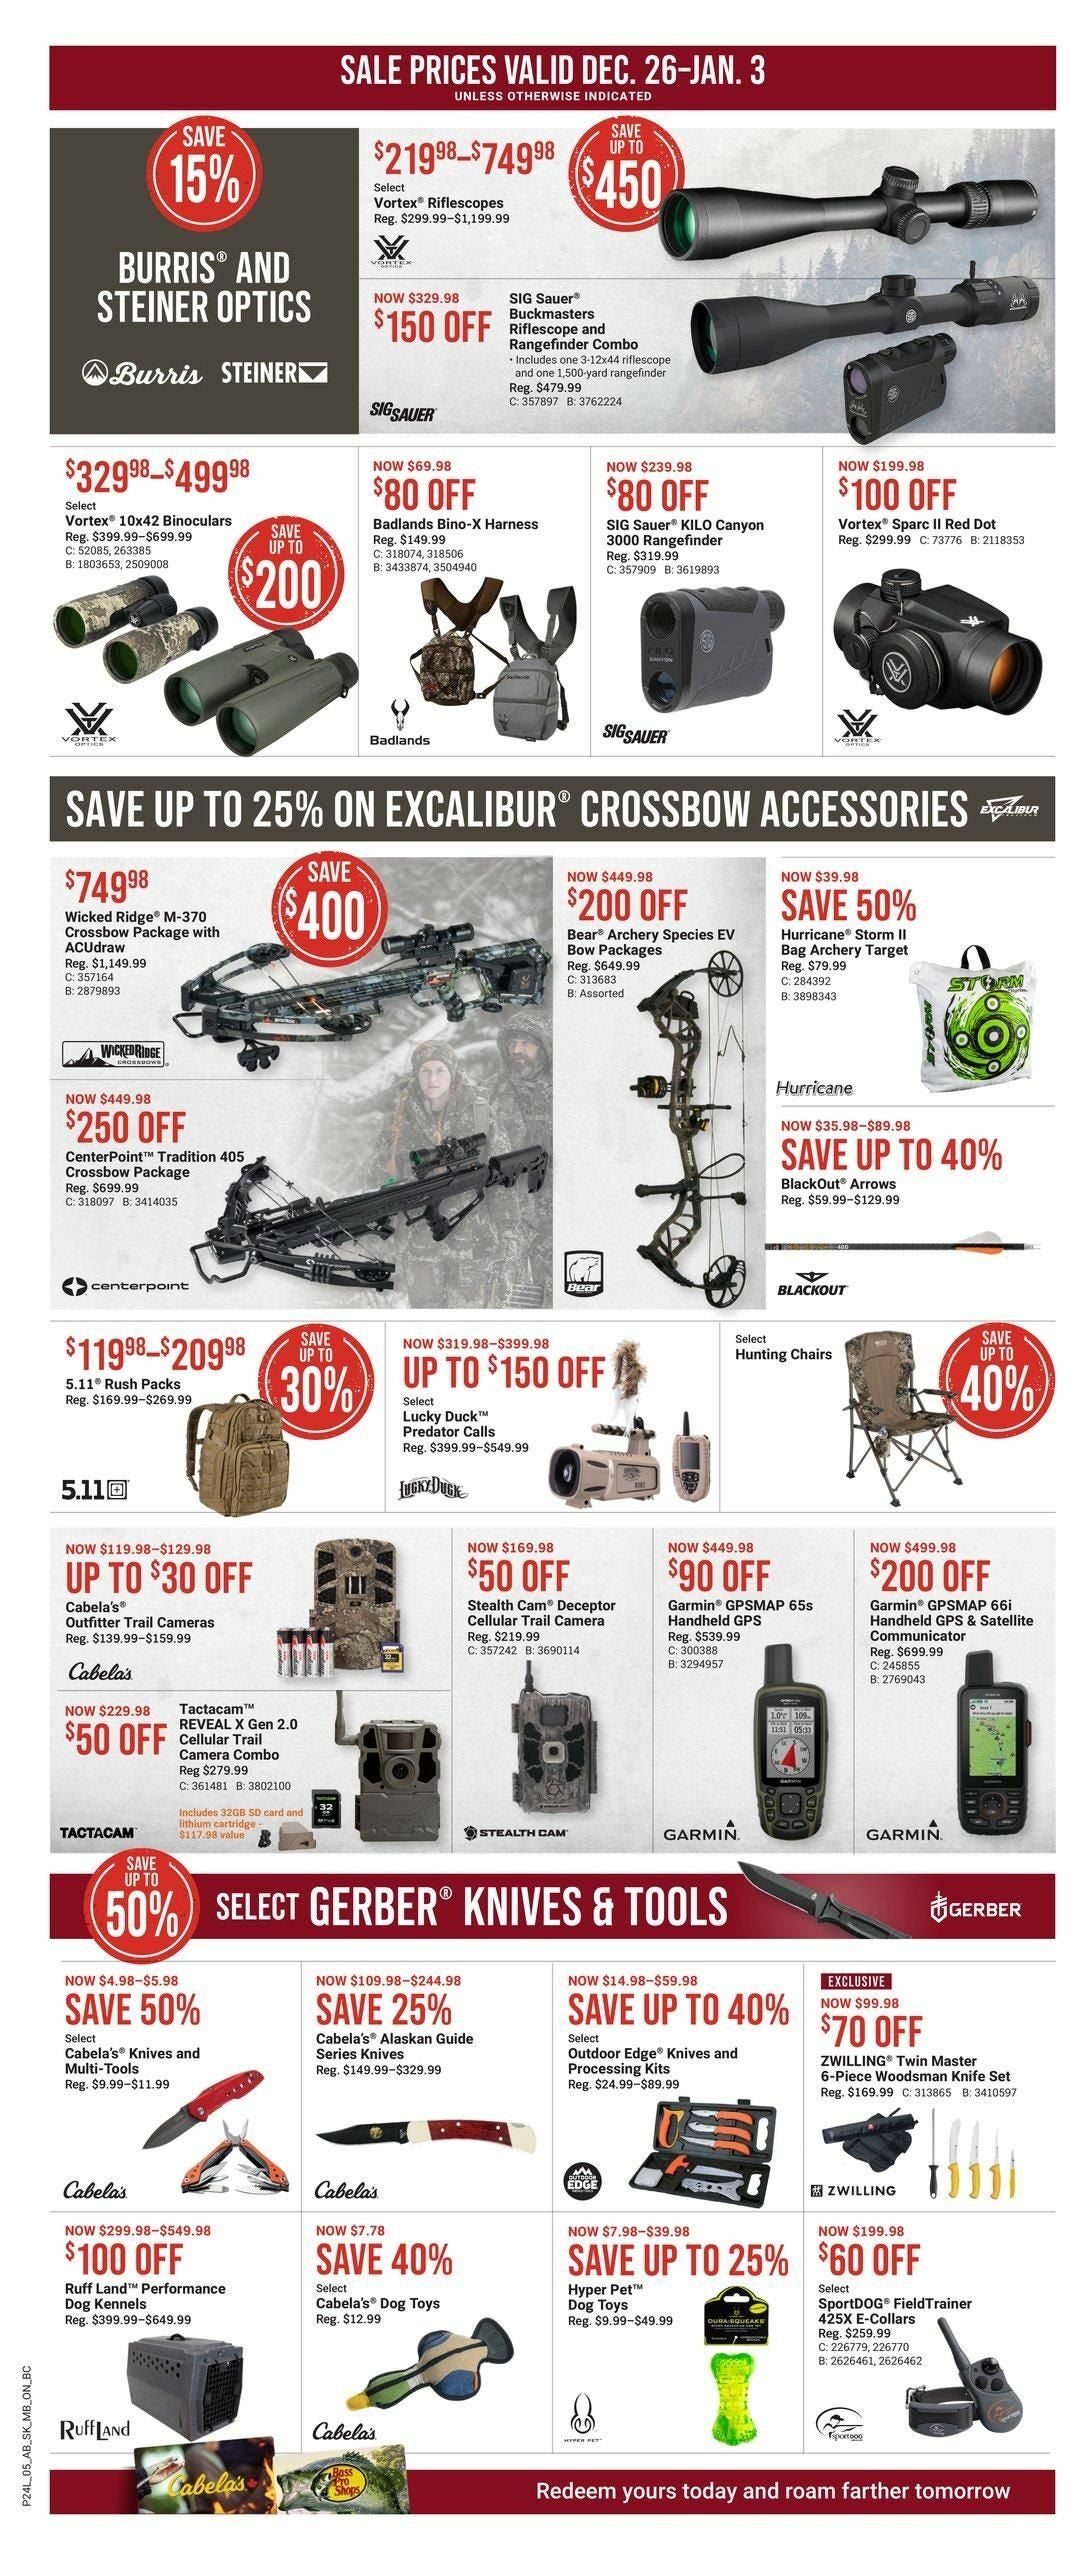 Bass Pro Shops Weekly Flyer - Boxing Week Sale (AB & ON) - Dec 26